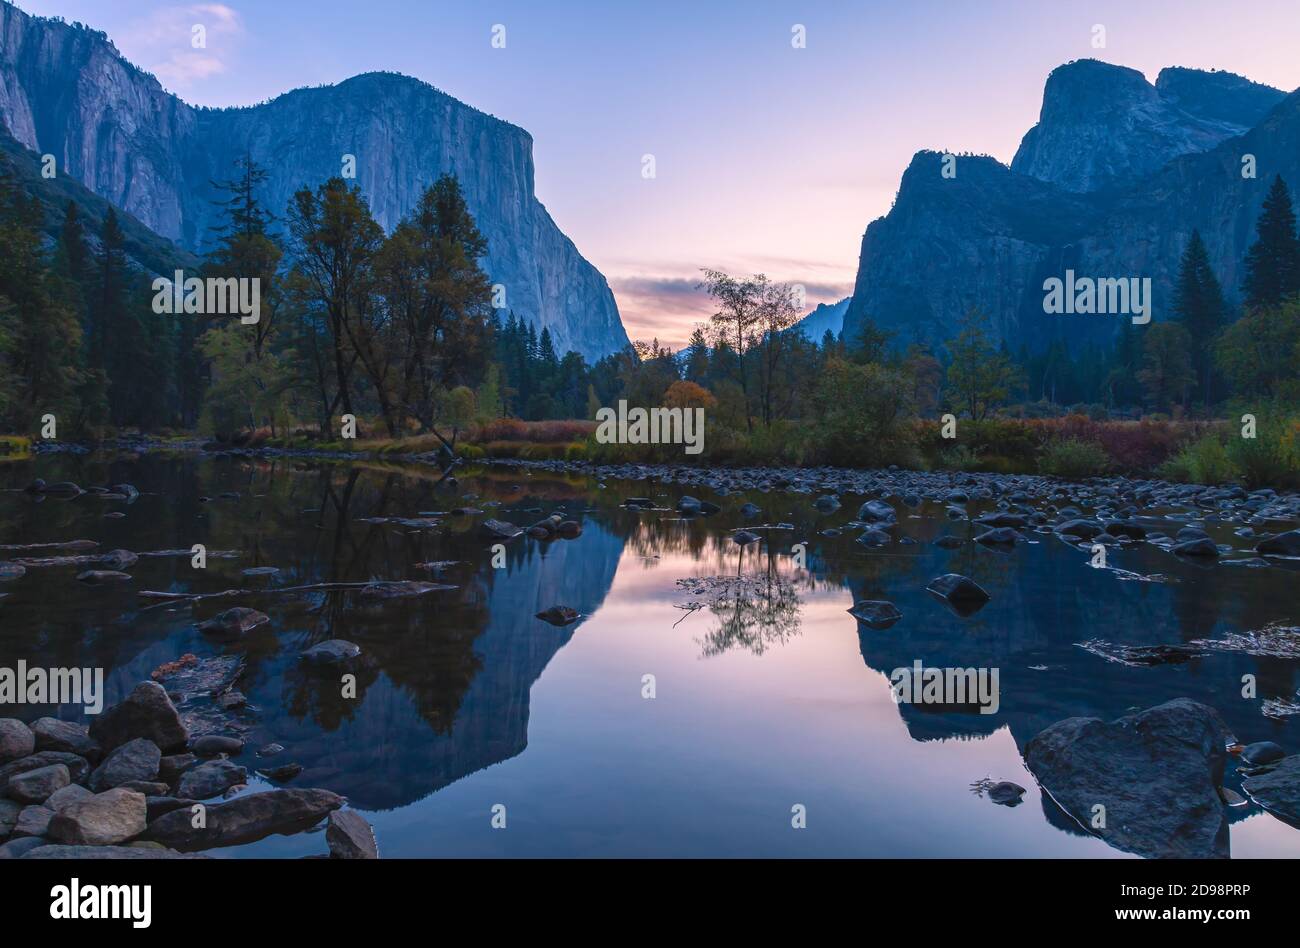 Iconic view of Yosemite Valley by the Merced River in late autumn, Yosemite National Park, California, USA, at dawn. Stock Photo